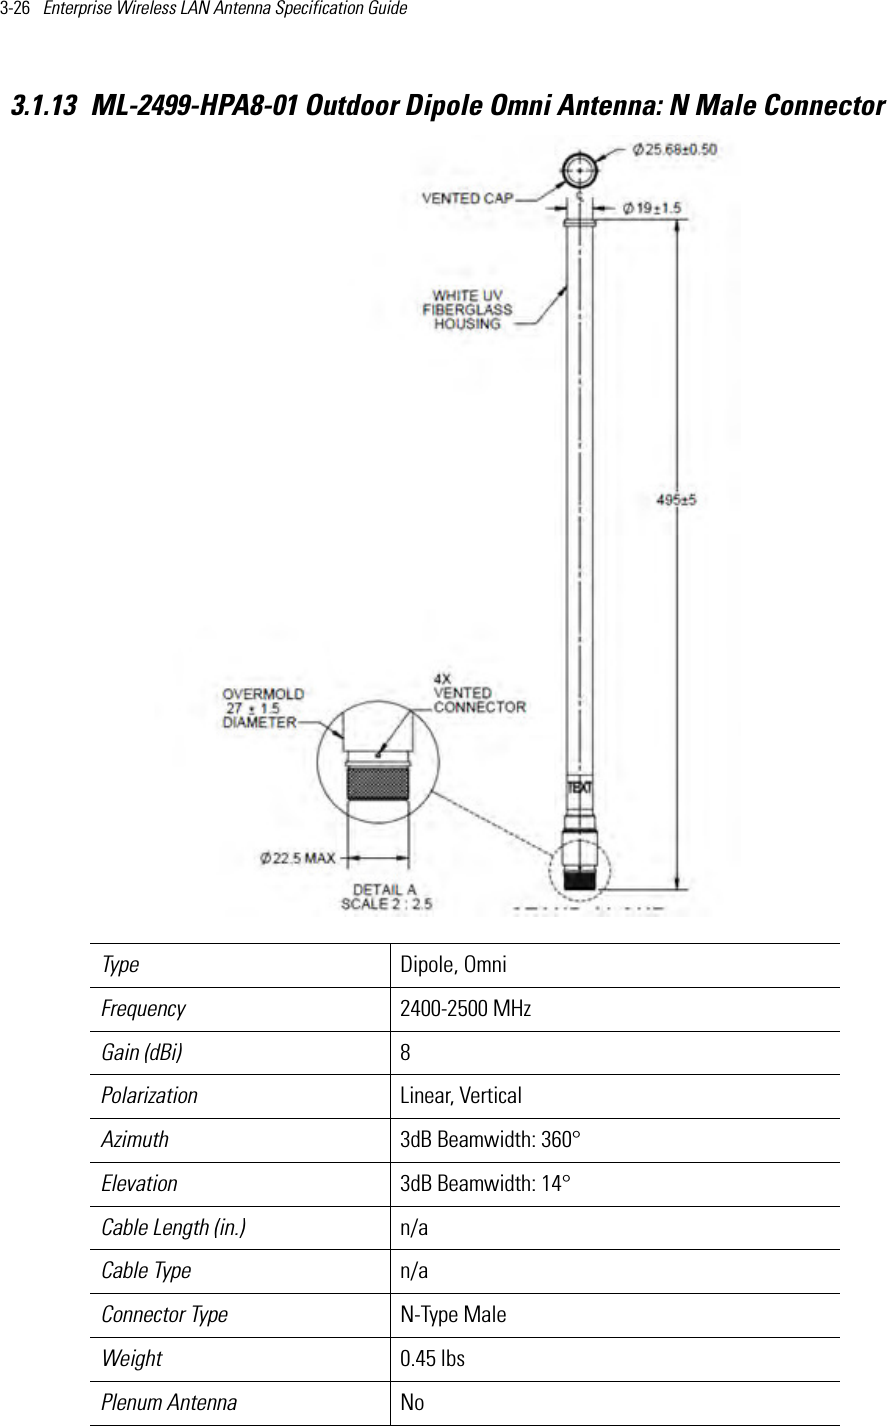 3-26   Enterprise Wireless LAN Antenna Specification Guide 3.1.13 ML-2499-HPA8-01 Outdoor Dipole Omni Antenna: N Male ConnectorType Dipole, Omni Frequency 2400-2500 MHzGain (dBi) 8Polarization Linear, VerticalAzimuth 3dB Beamwidth: 360°Elevation 3dB Beamwidth: 14°Cable Length (in.) n/aCable Type n/aConnector Type N-Type MaleWeight 0.45 lbs Plenum Antenna No